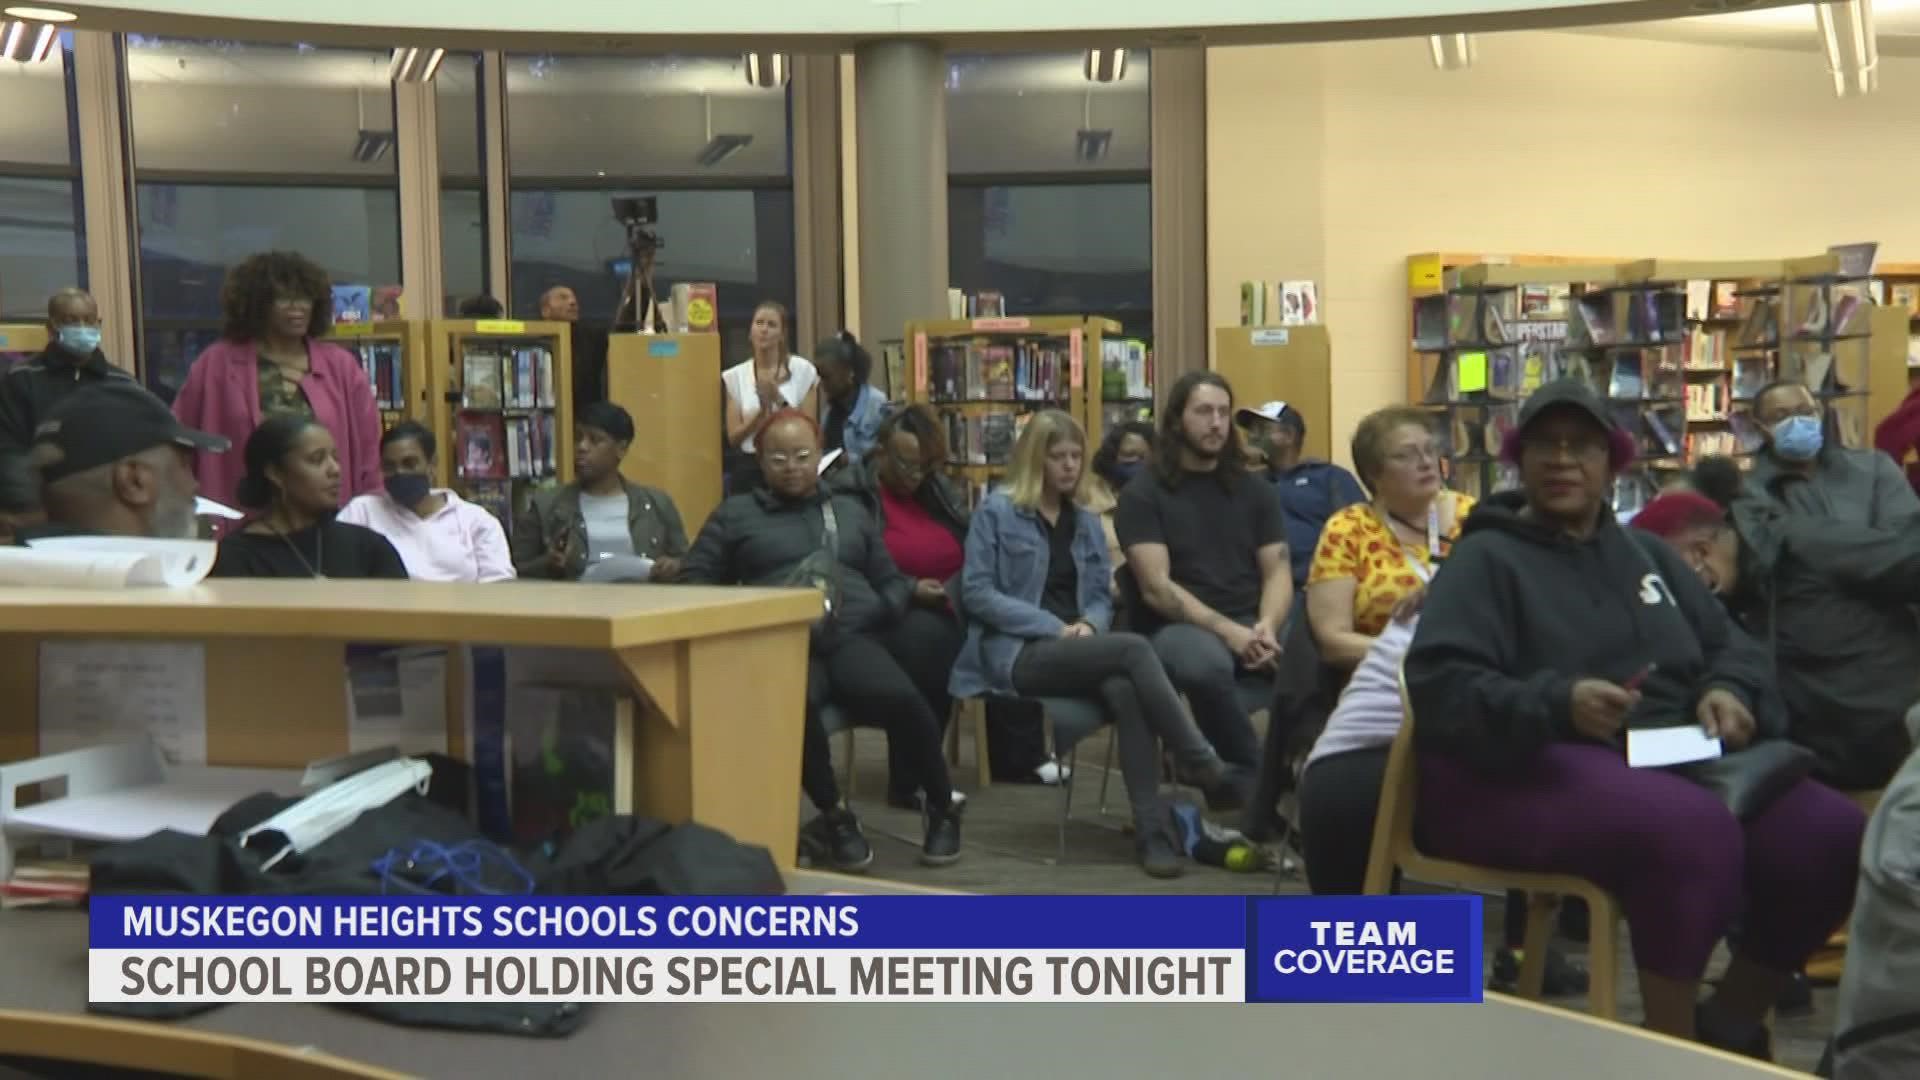 Muskegon Heights is hosting a special meeting Tuesday night to discuss these concerns. Parents and teachers say there's staffing shortages and a lack of resources.